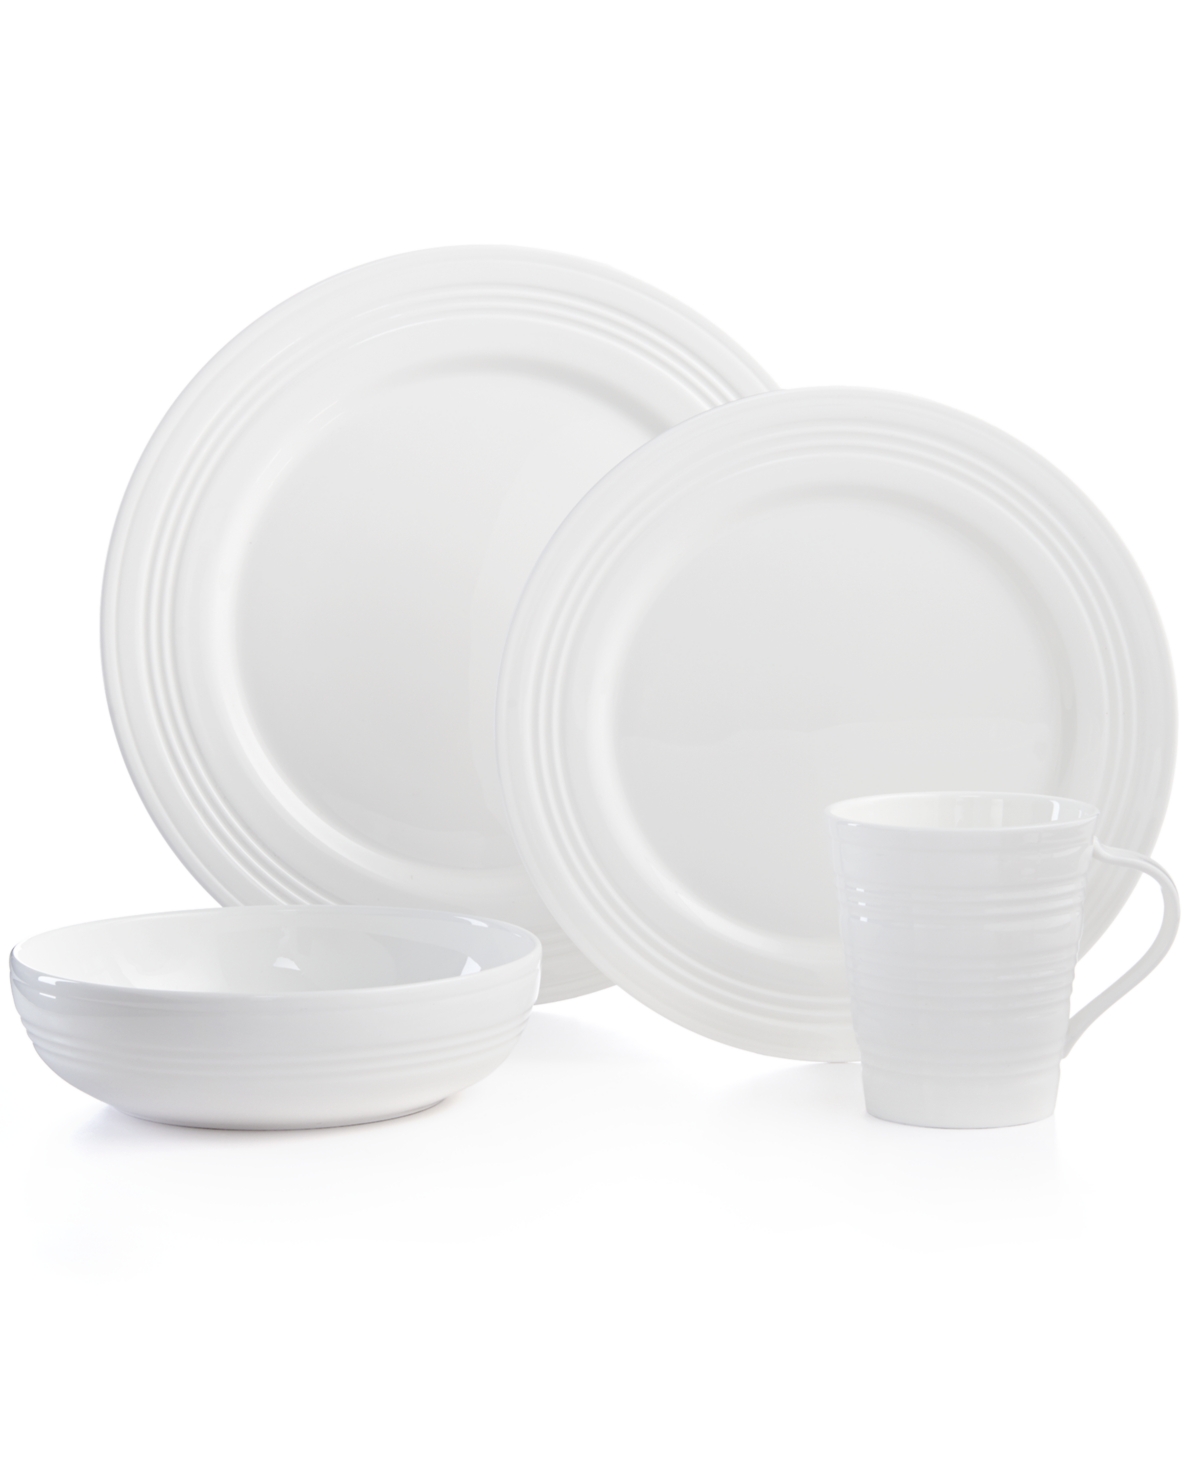 Dinnerware, Tin Can Alley 4 Degree Round 4 Piece Place Setting - White